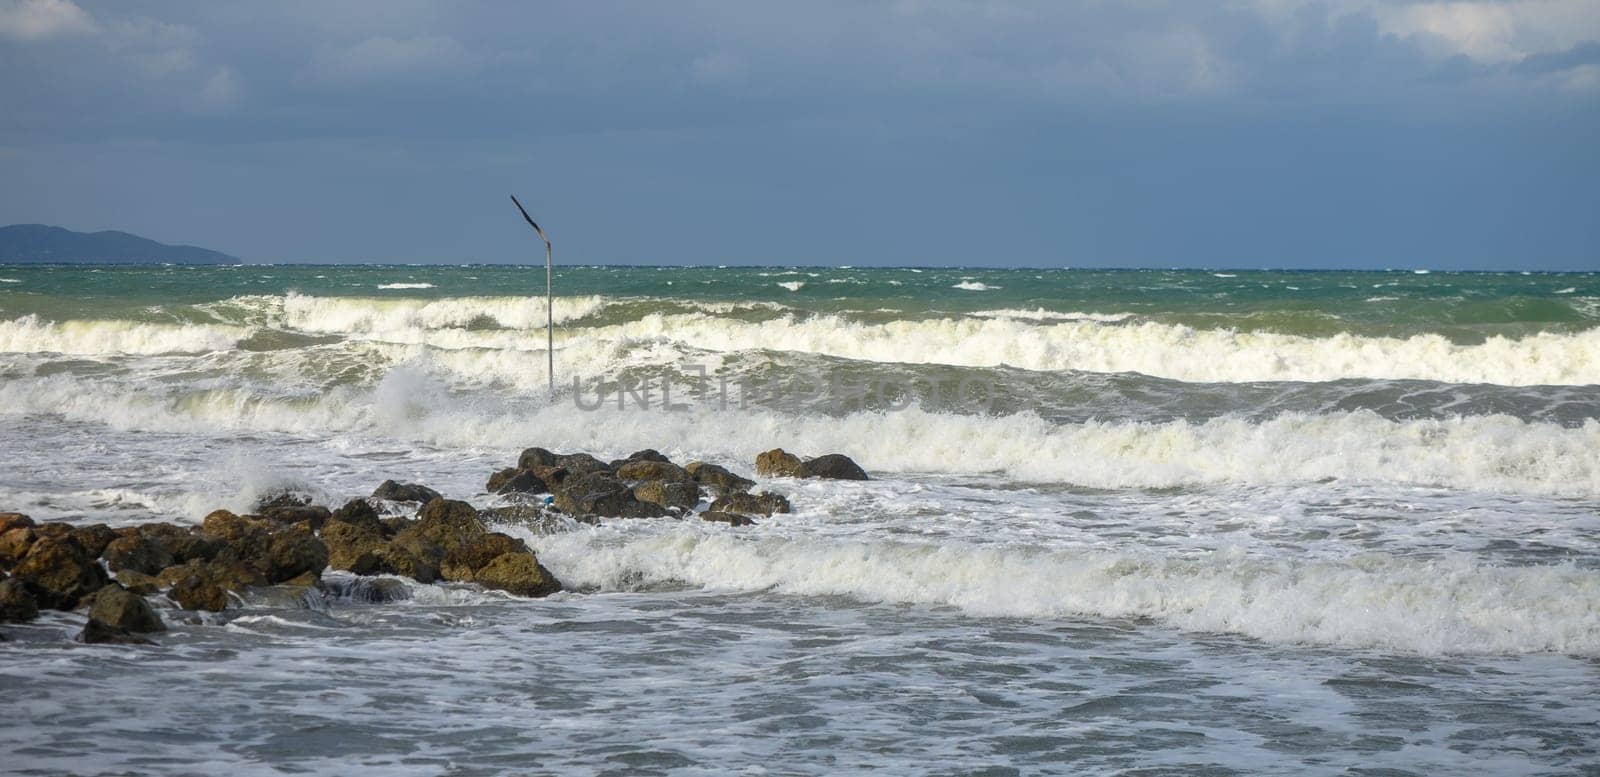 waves on the Mediterranean Sea of ​​Cyprus during a storm 19